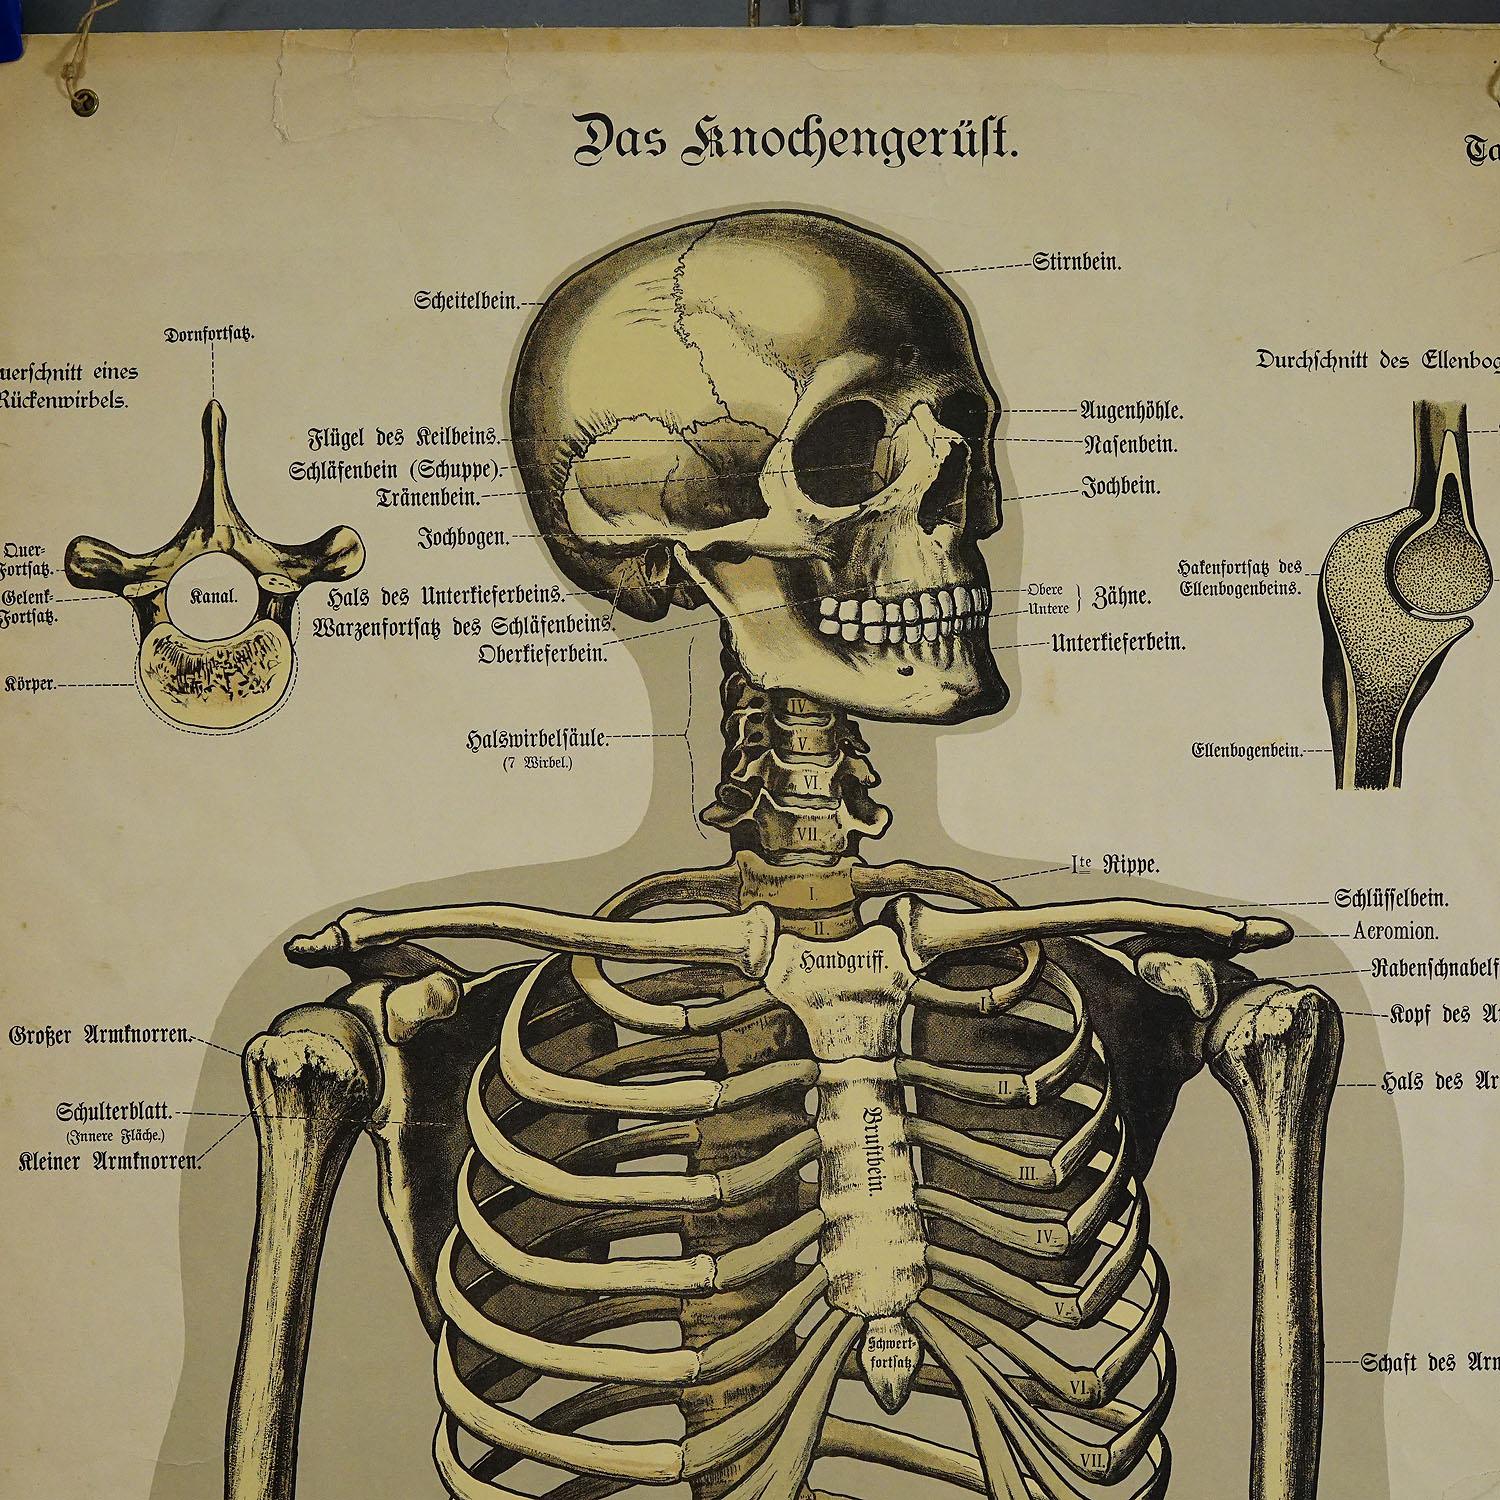 A rare 19th century anatomical wall chart depicting the human skeleton. On the sides On the sides are detailed description in German language. The wall chart is printed on cardboard, published by J. F.Schreiber, Germany circa 1900. Very good